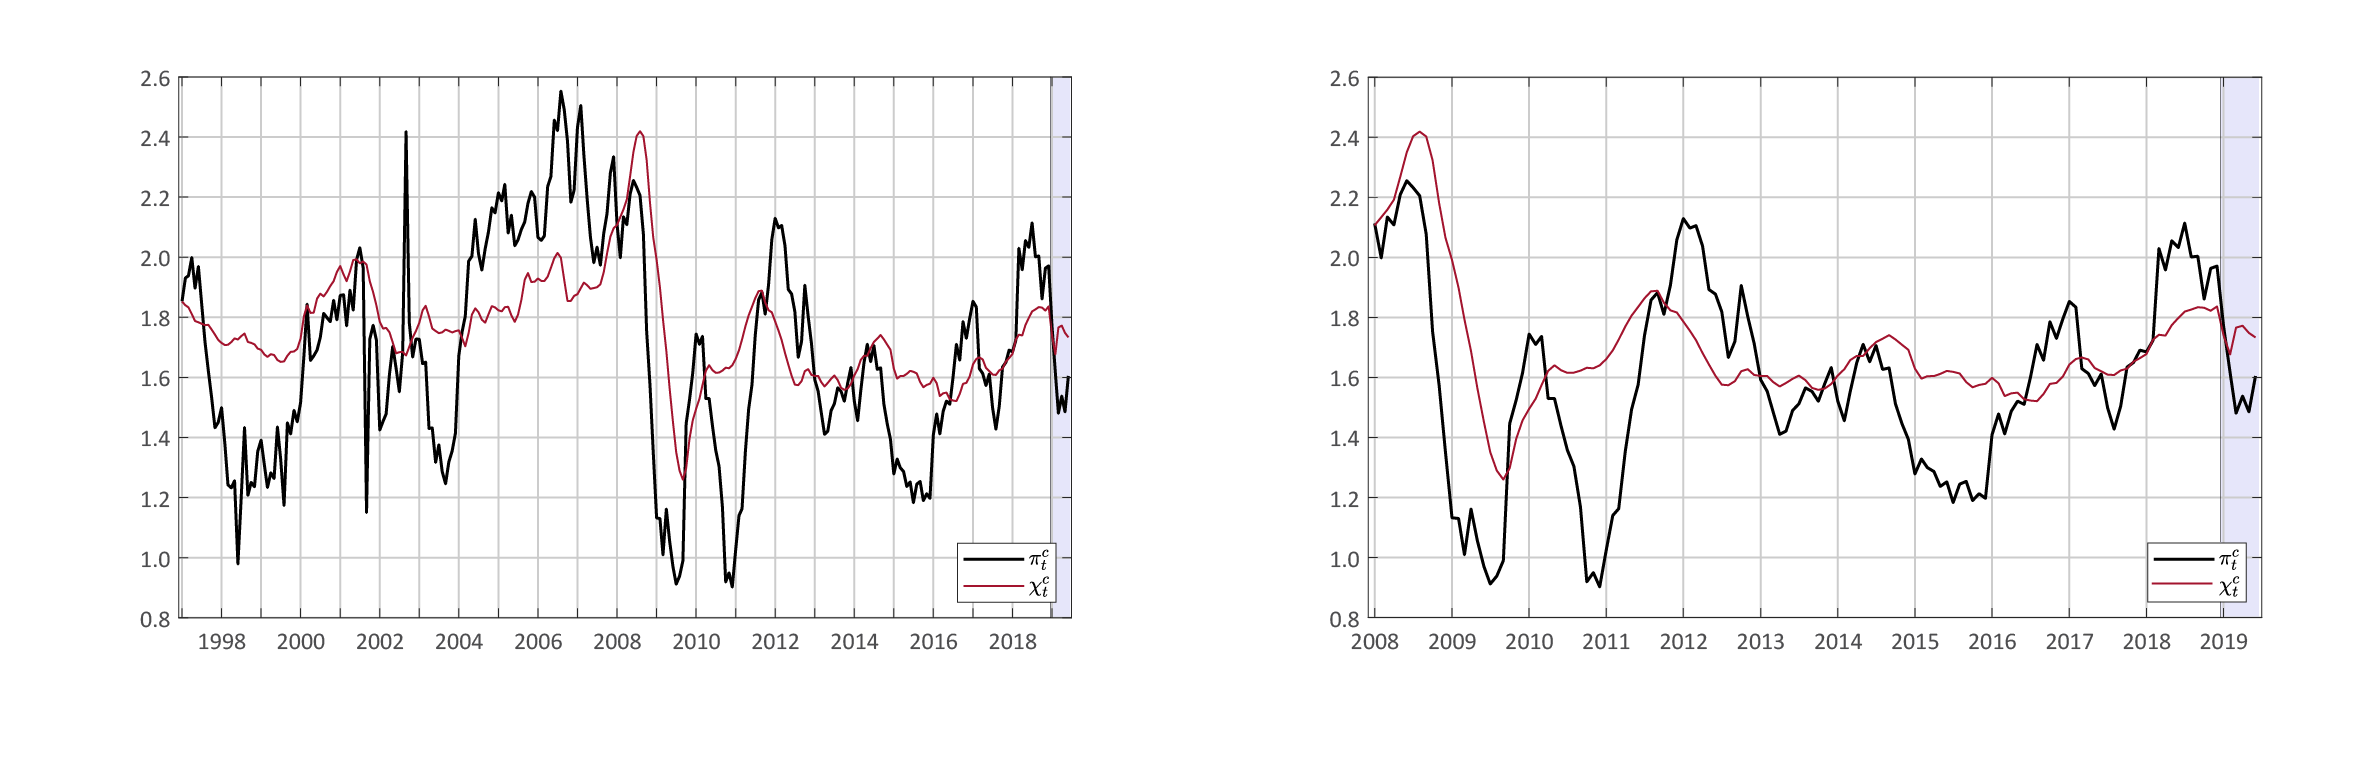 Figure 2. Common and Idiosyncratic Decomposition
Core PCE Prices – Year-on-Year Inflation. See accessible link for data.